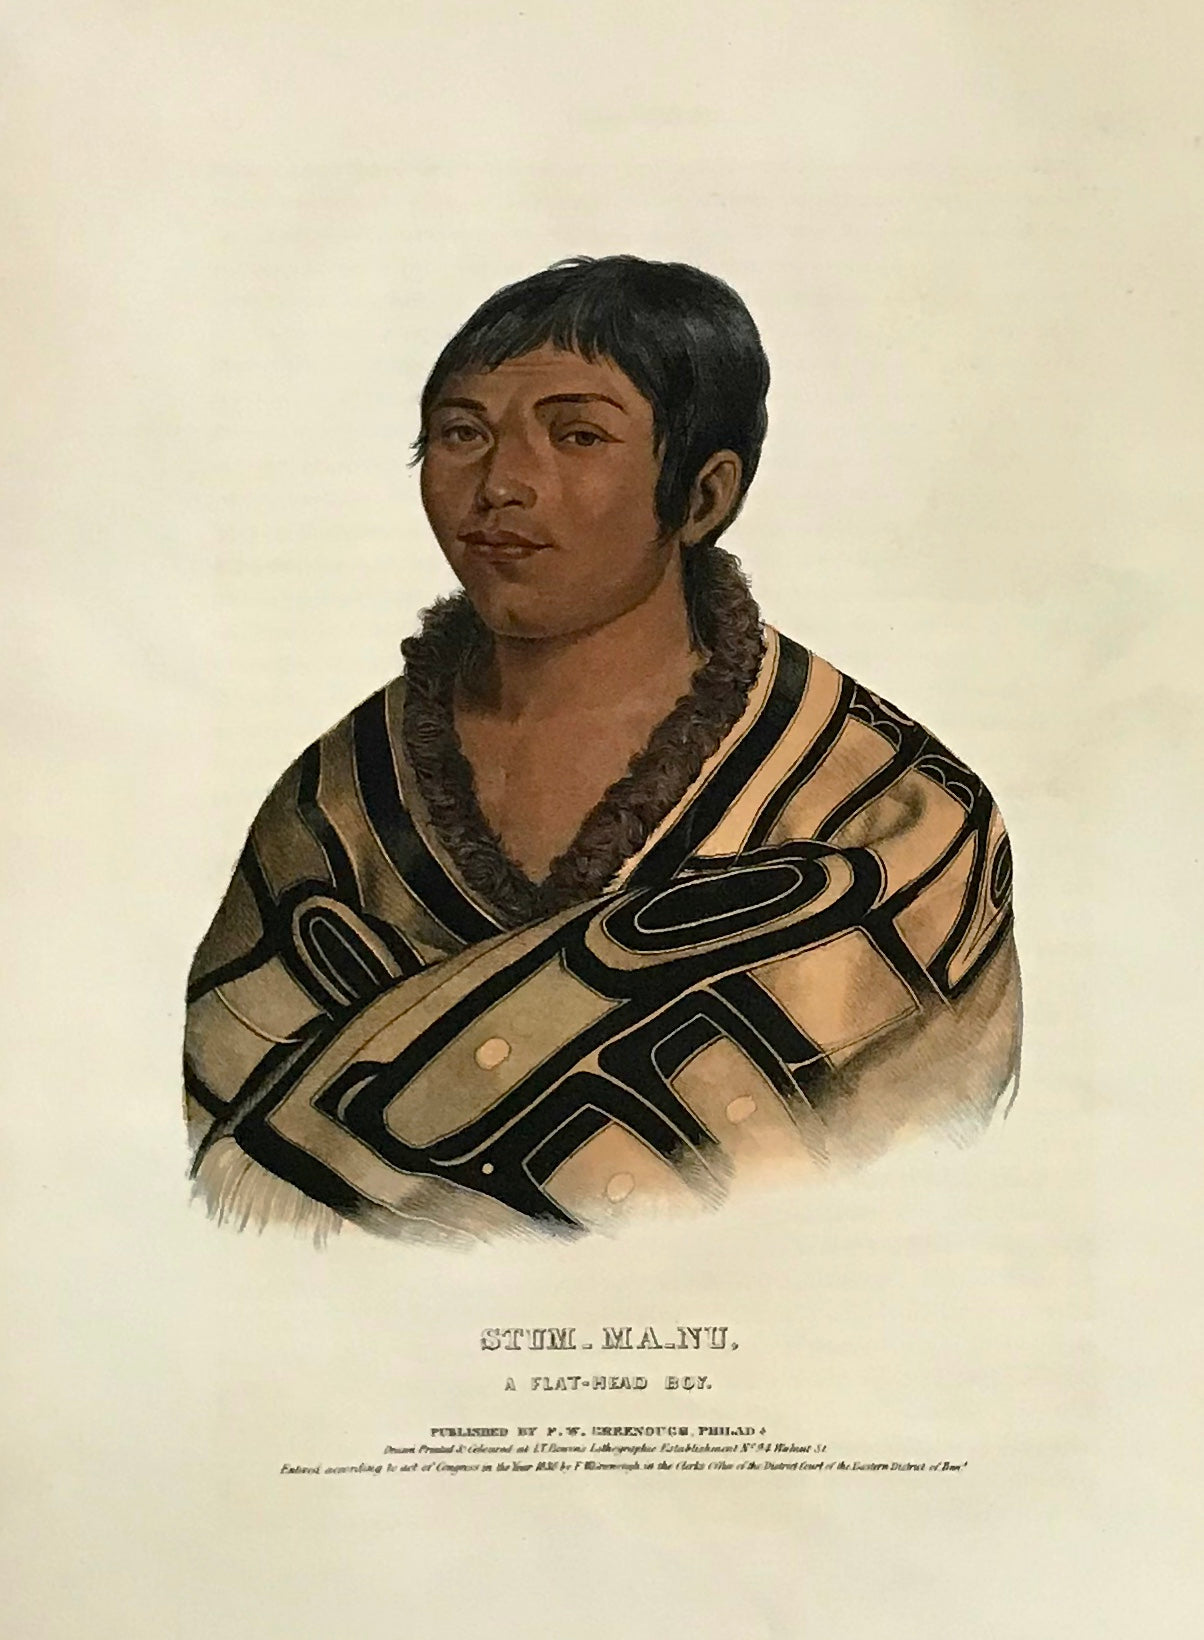 "Stum-Ma-Nu. A flat-Head Boy" Lithograph. Original hand coloring Painting by Charles Bird King (1785-1862) Published in: "History of the Indian Tribes of North America" Authors: Thomas Loraine McKenny (1785-1859) and James Hall (1793-1868)